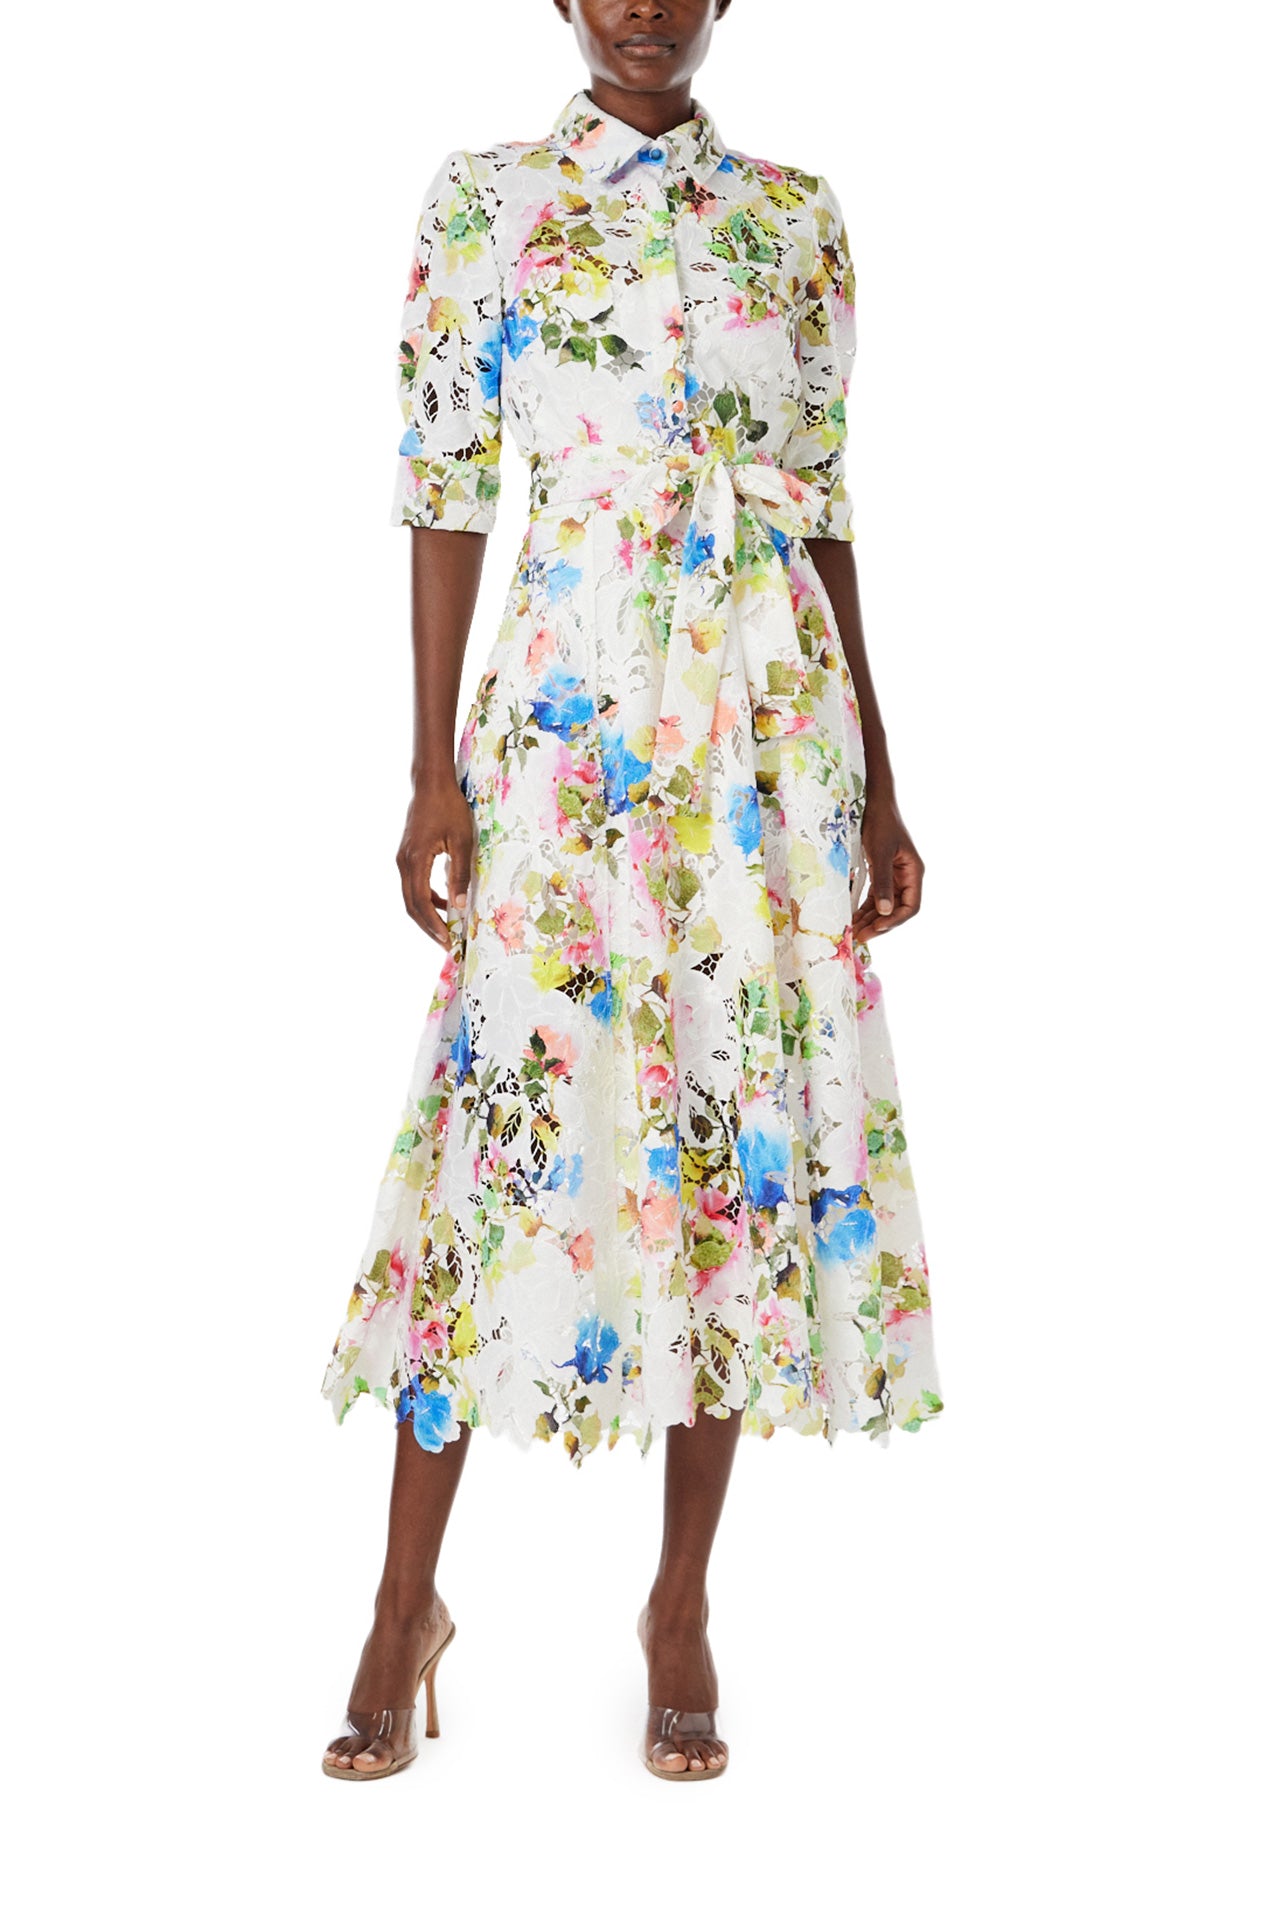 Monique Lhuillier Spring 2024 silk white floral printed lace shirt dress with pockets and a scalloped hem - front.